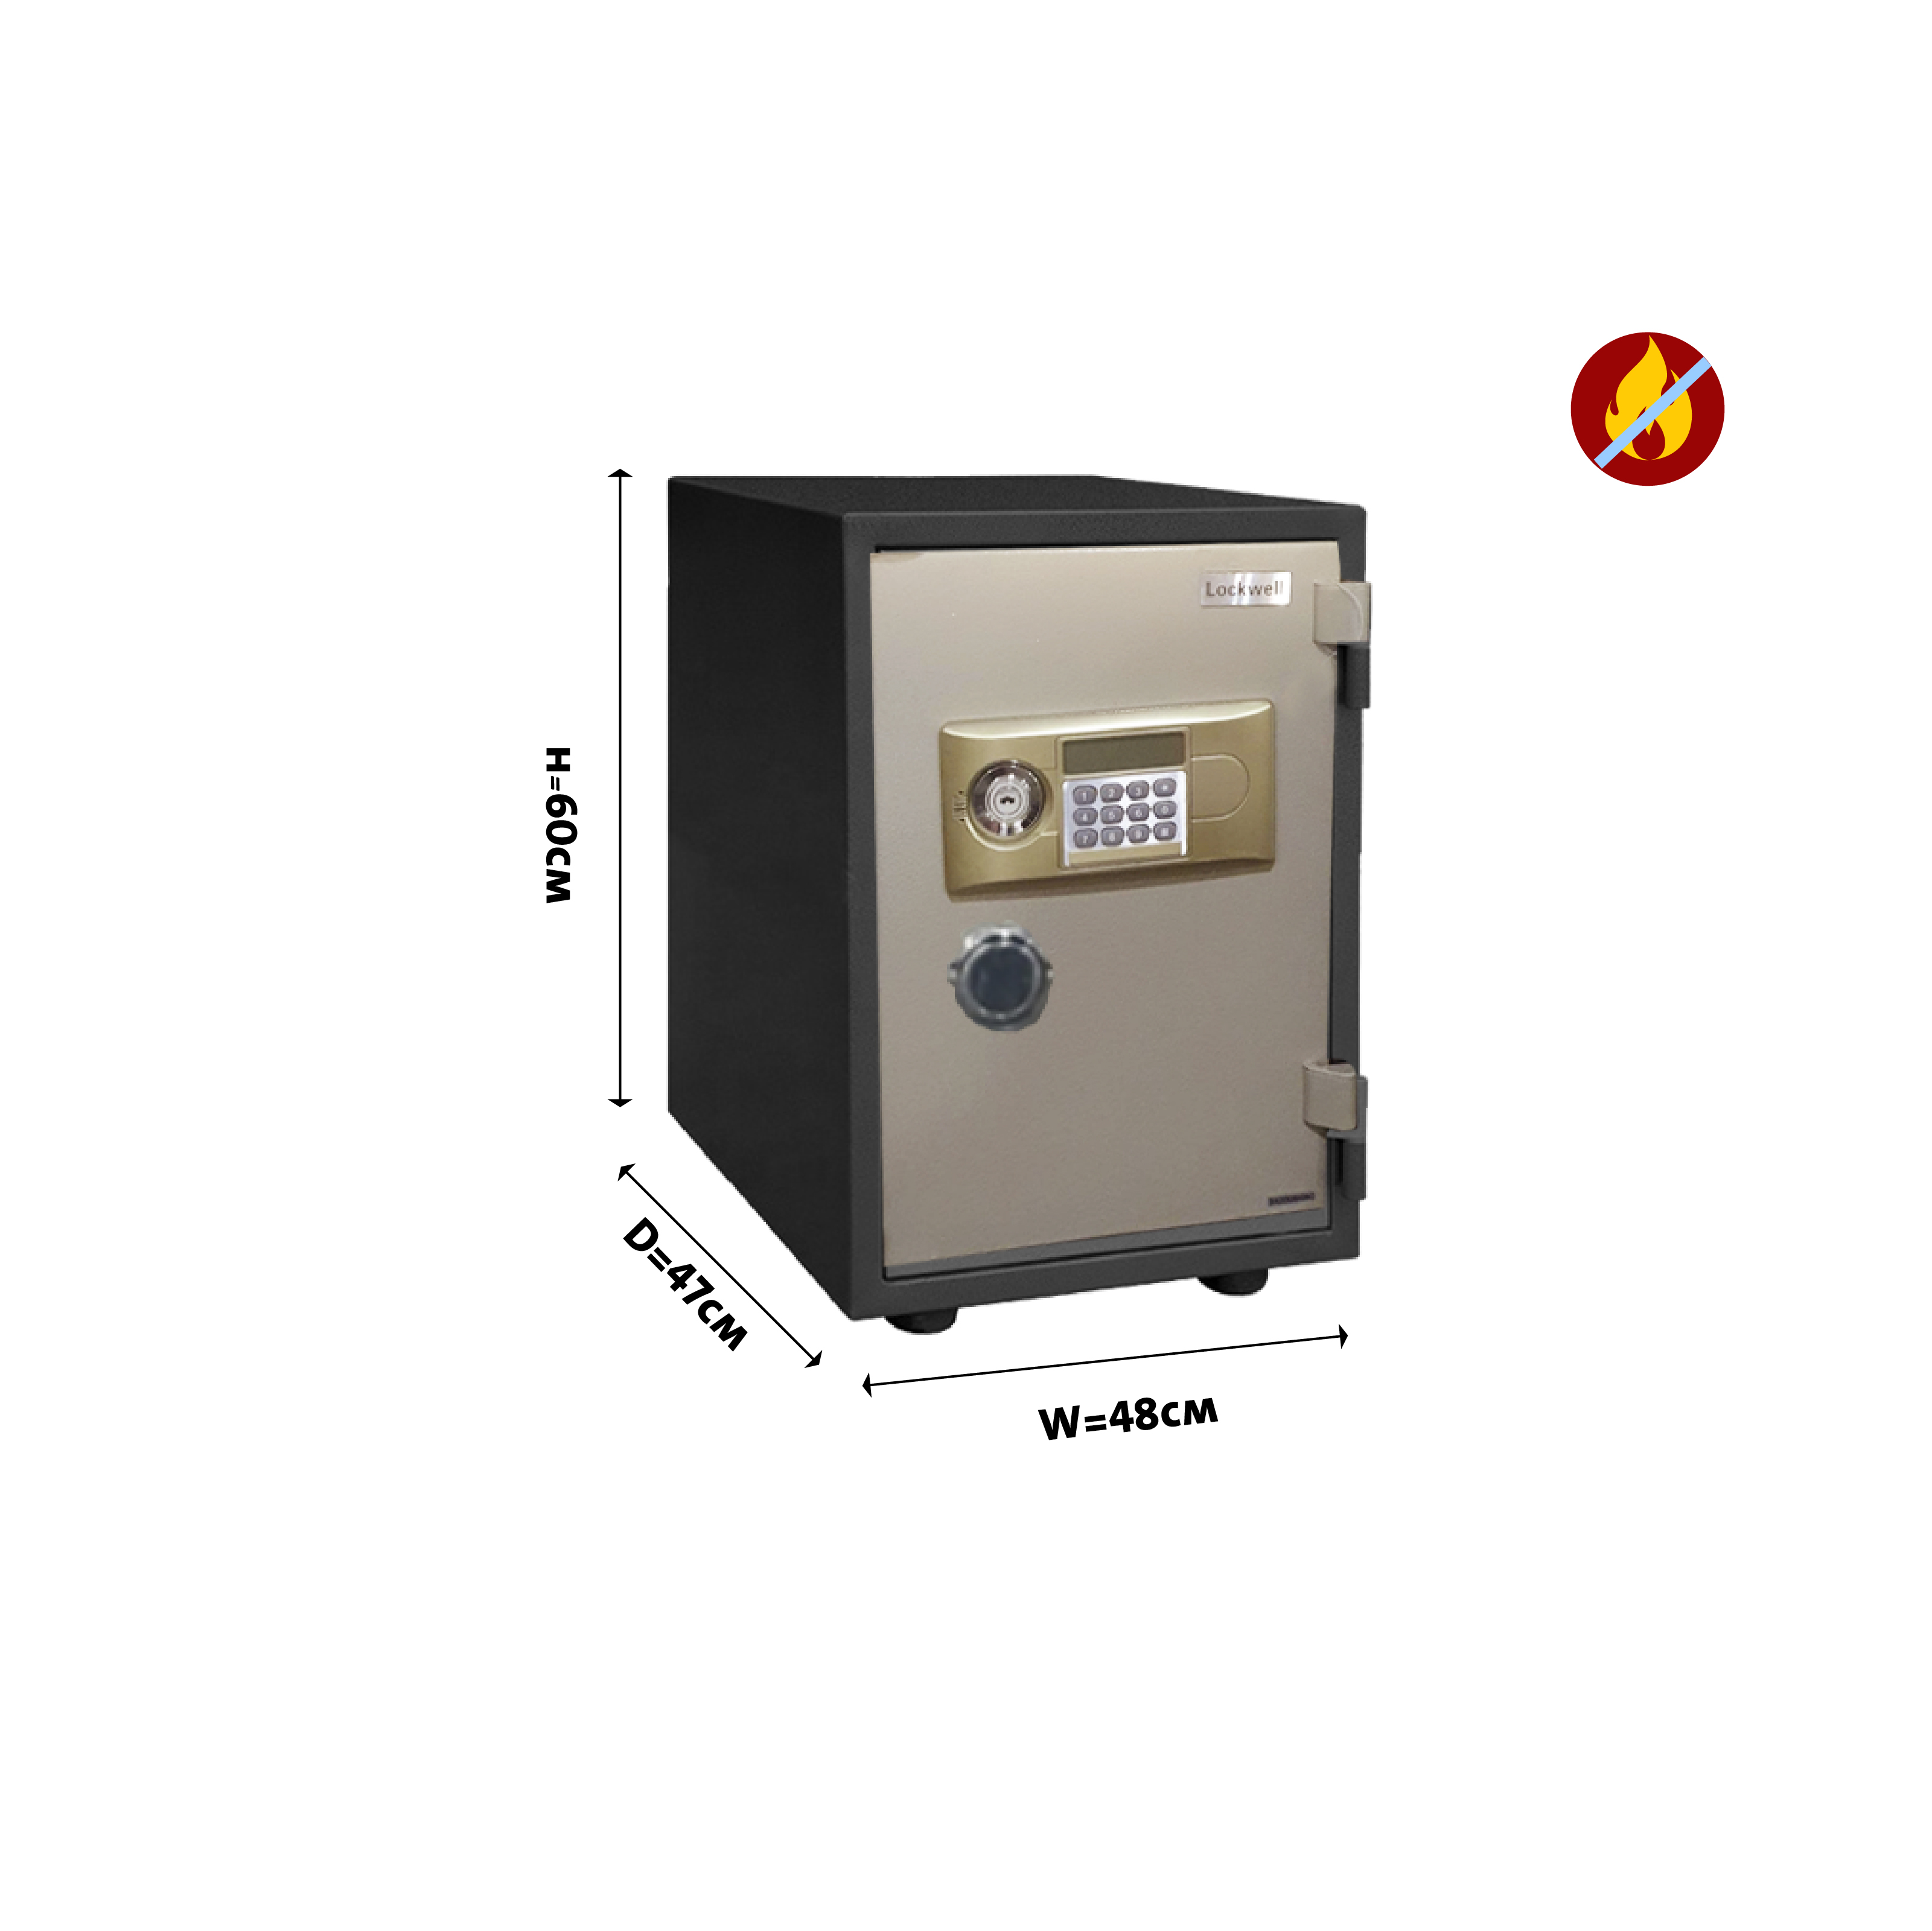 Lockwell YB600ALD ELectronic Fire Safe